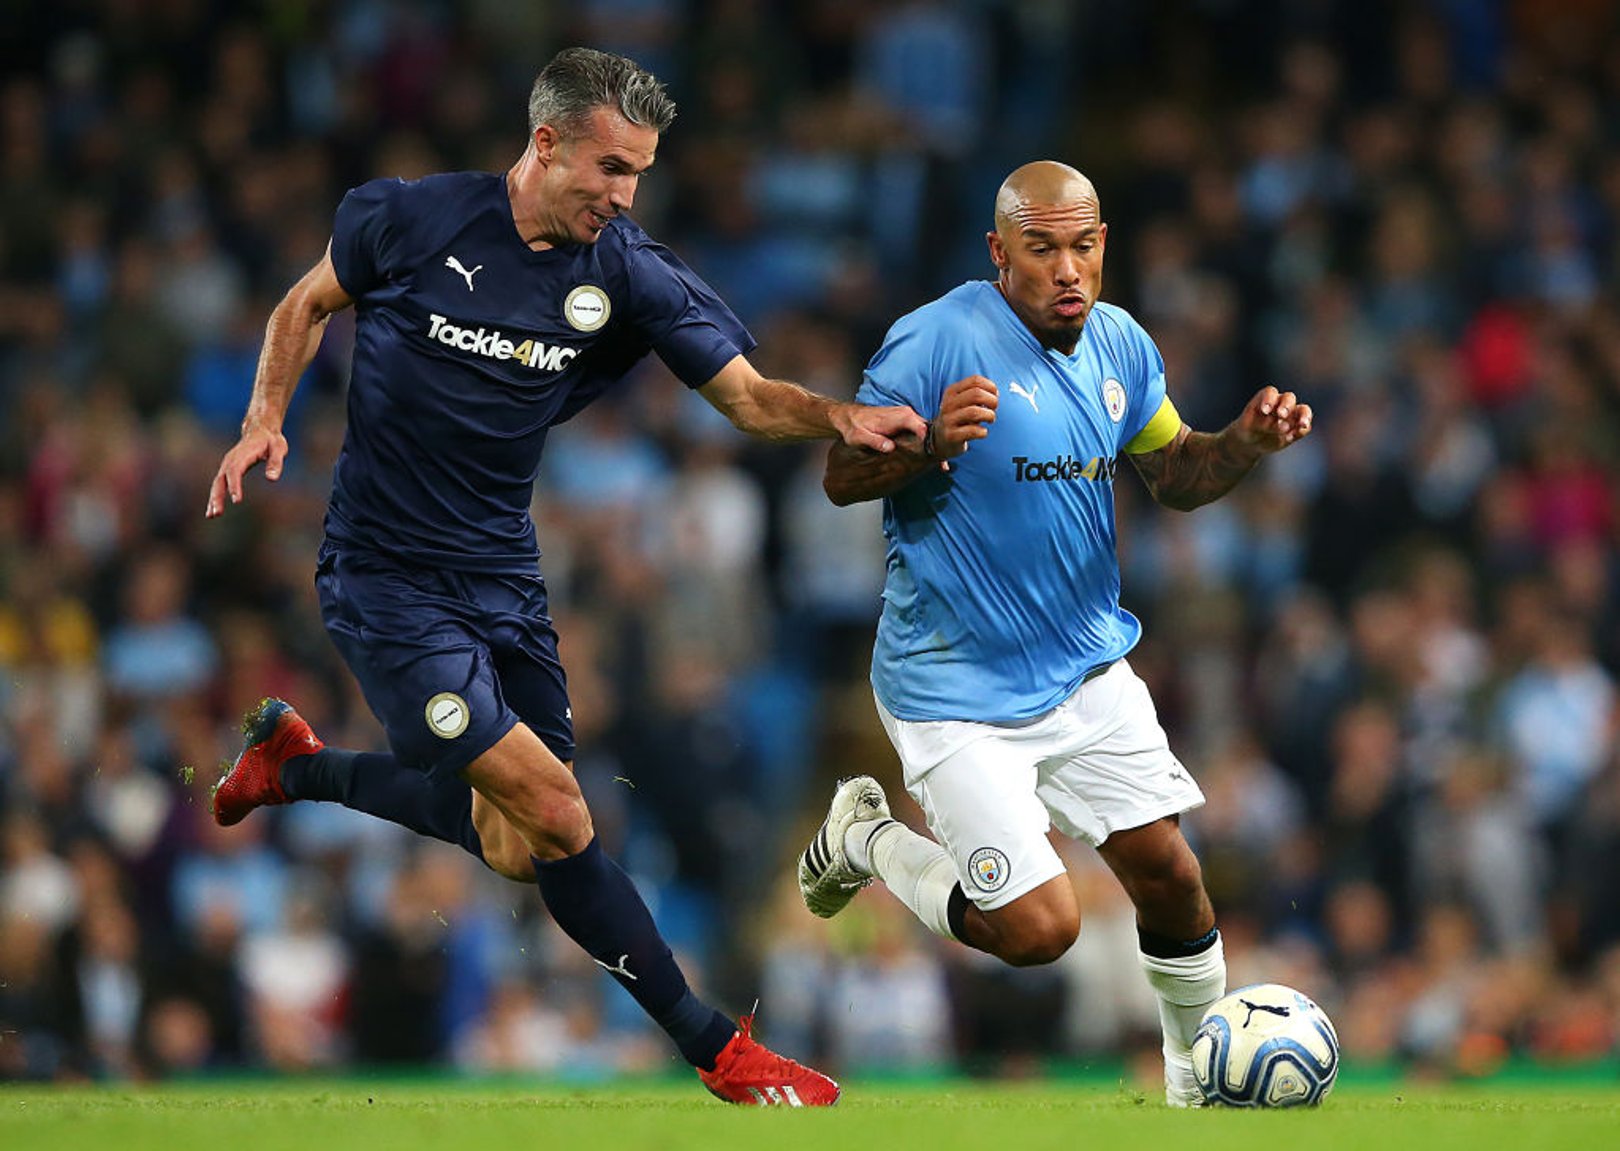 Nigel De Jong: The changing role of midfielders, tackling and City fans